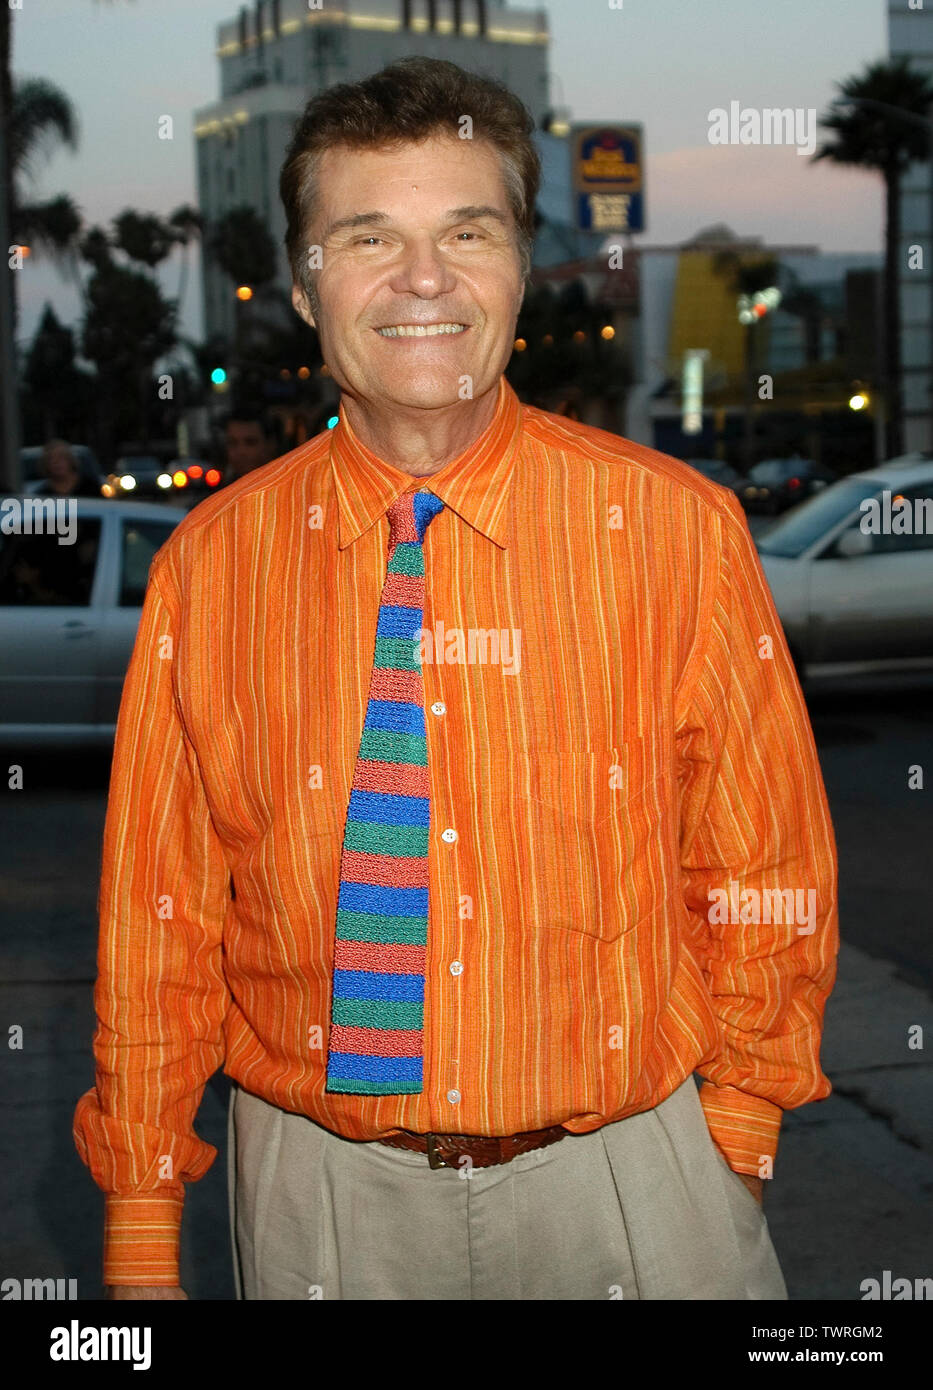 Fred Willard at The Smothers Brothers performance benefiting Children of the Night at the Comedy Store in West Hollywood, CA. The event took place on Thursday, July 31, 2003.  Photo credit: SBM / PictureLux File Reference # 33790-2991SMBPLX  For Editorial Use Only -  All Rights Reserved Stock Photo